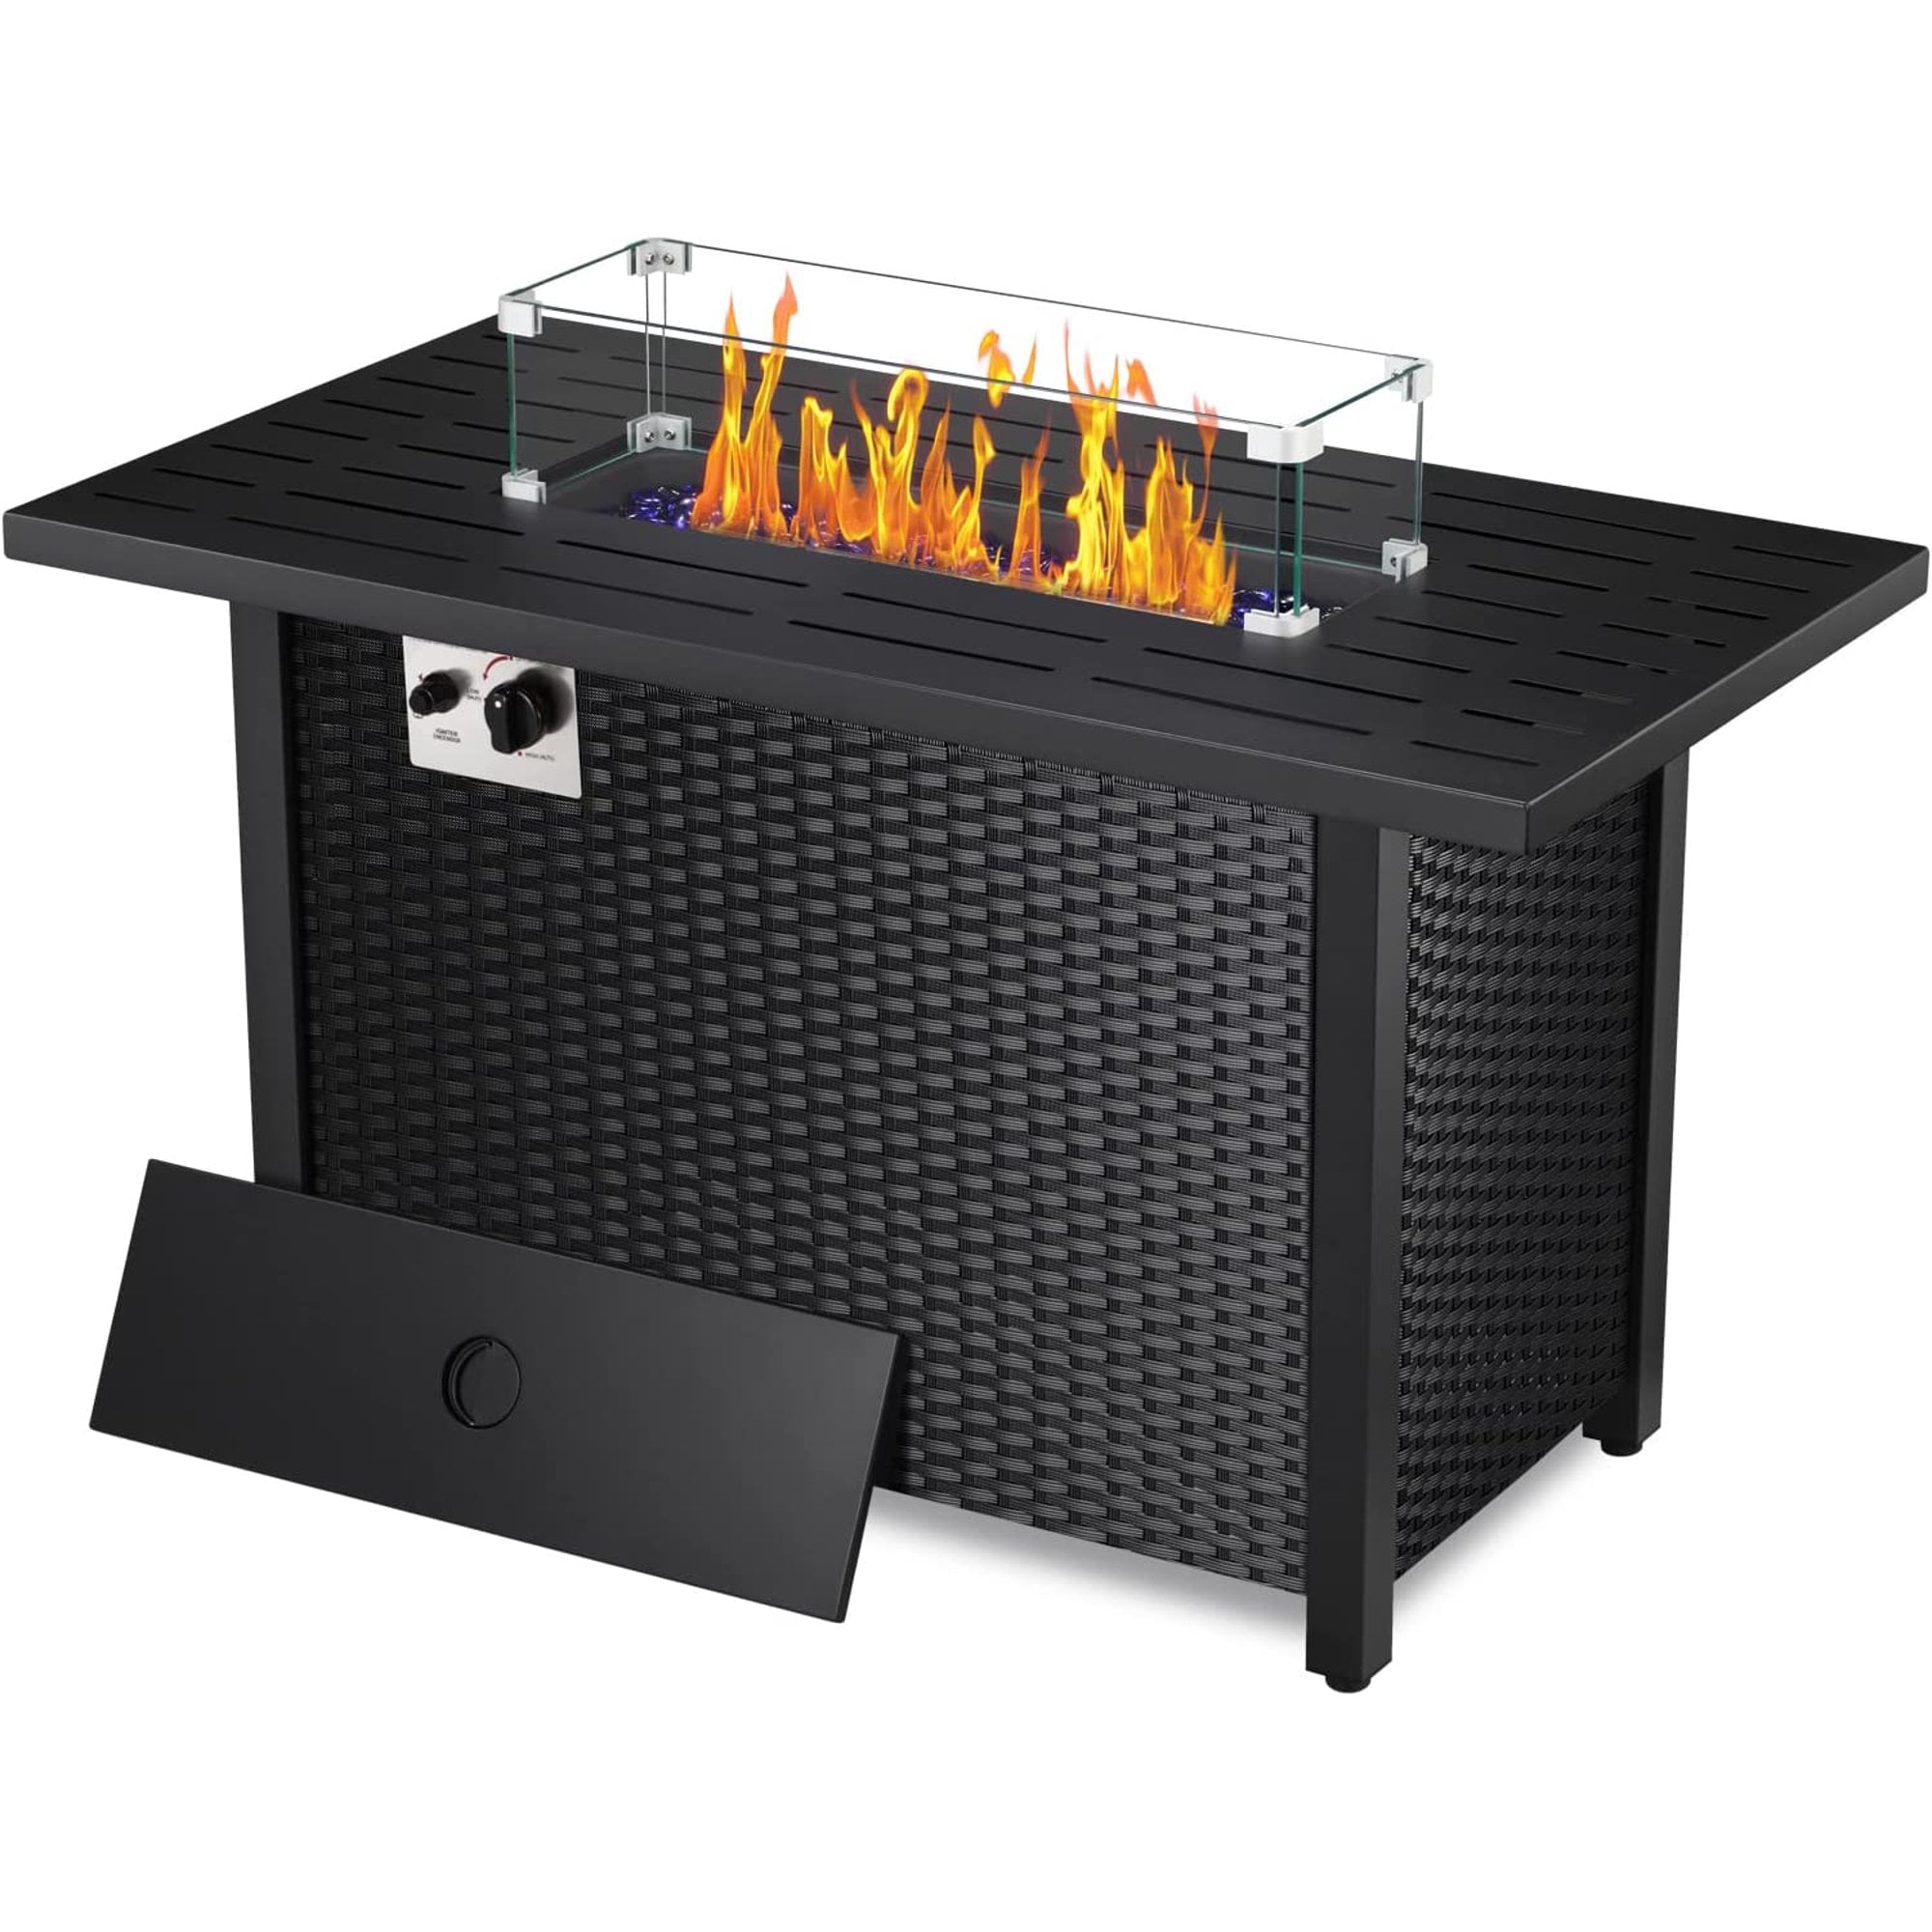 AGLUCKY Wicker Outdoor Propane Fire Pit Table 43in Square Metal Firepits- Propane Fire Pit Table with Lava Rocks, Glass Wind Guard Steel Fire Pit Table for Picnic, 50000 BTU